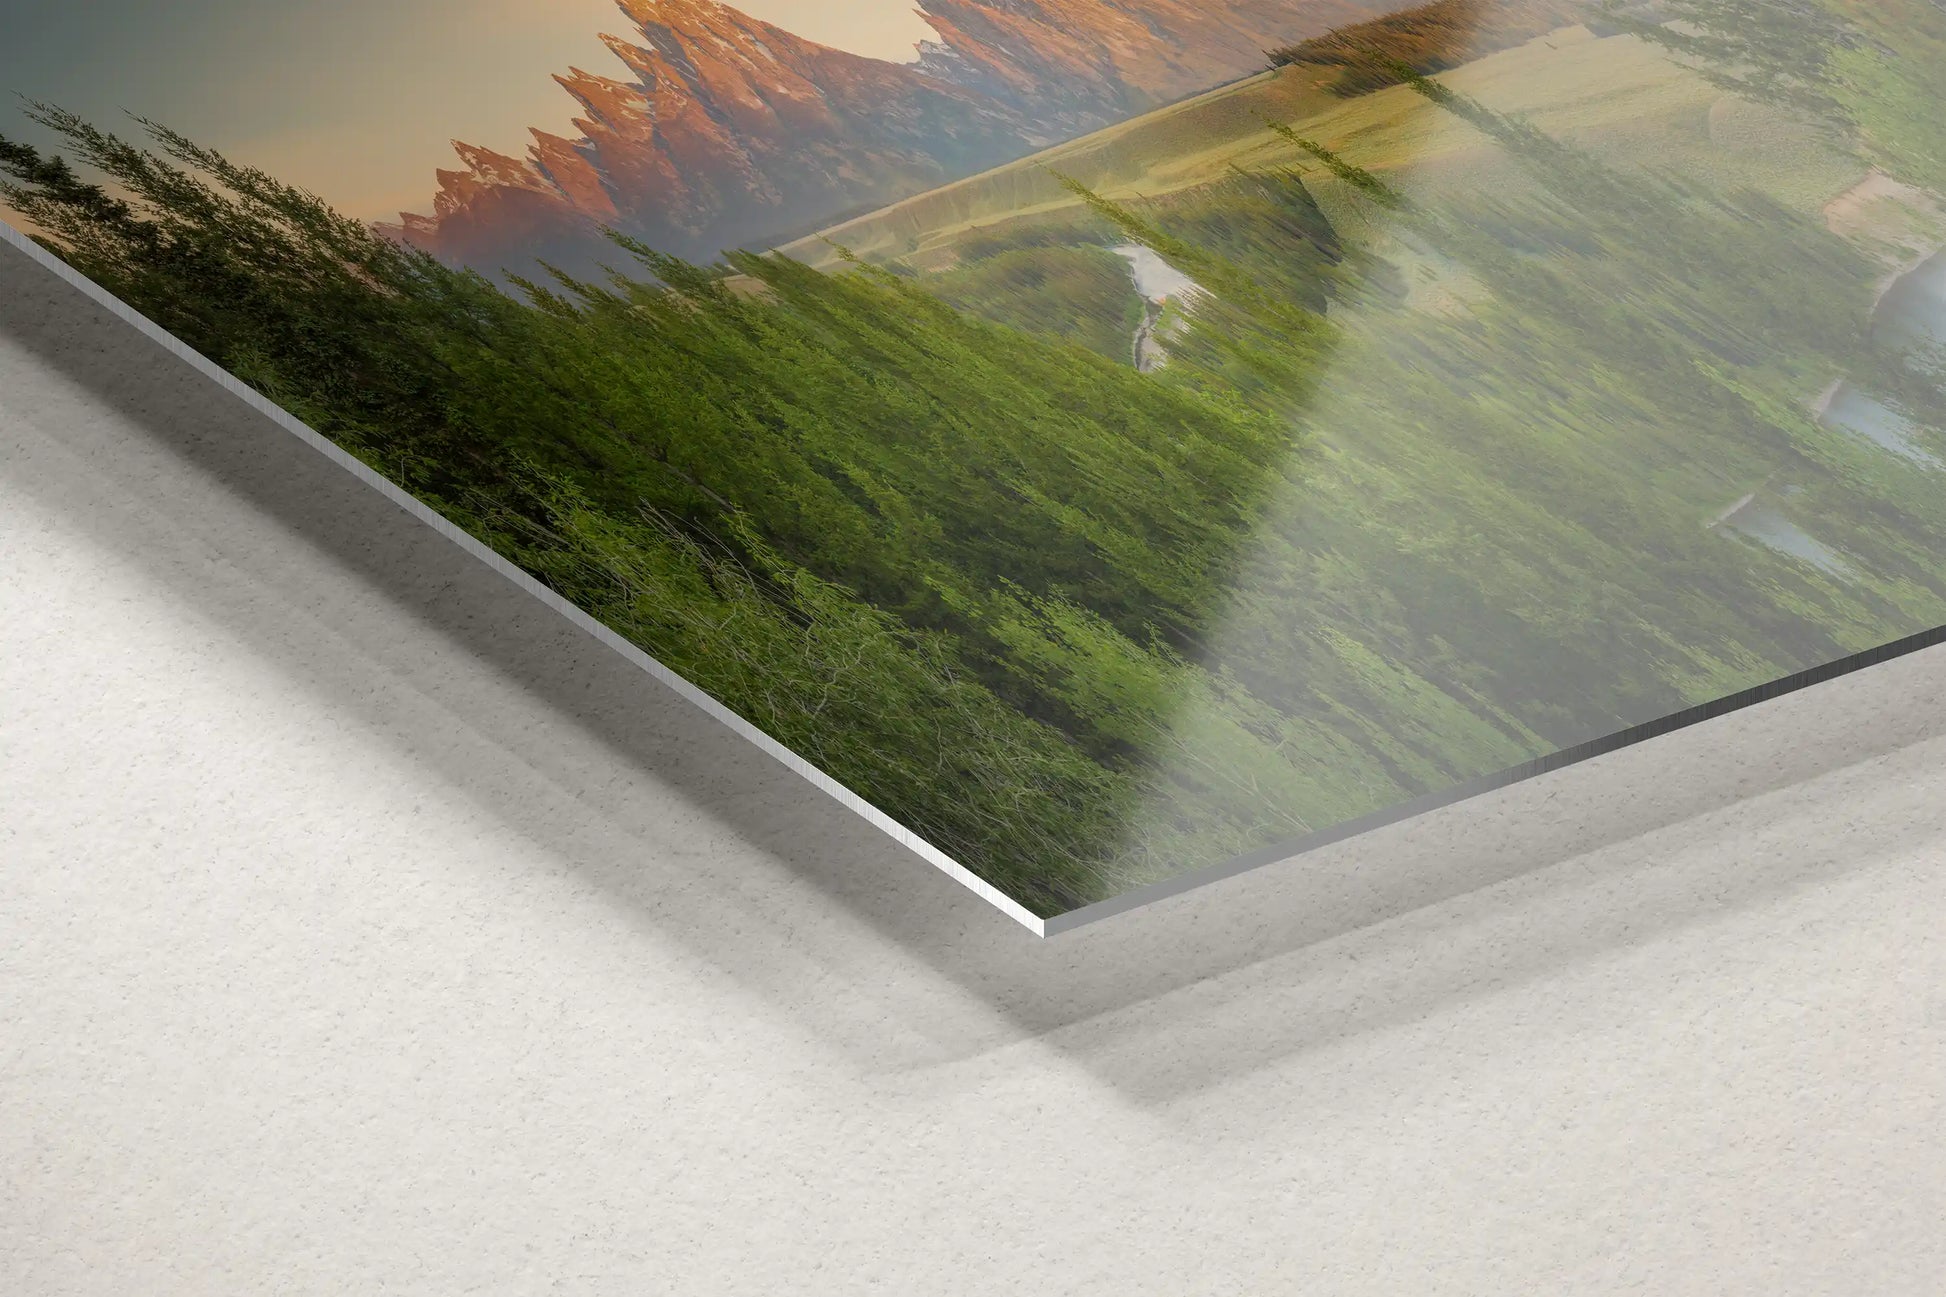 Close-up of aluminum metal corner showing a panoramic view of the Teton Mountains and Snake River at sunrise.